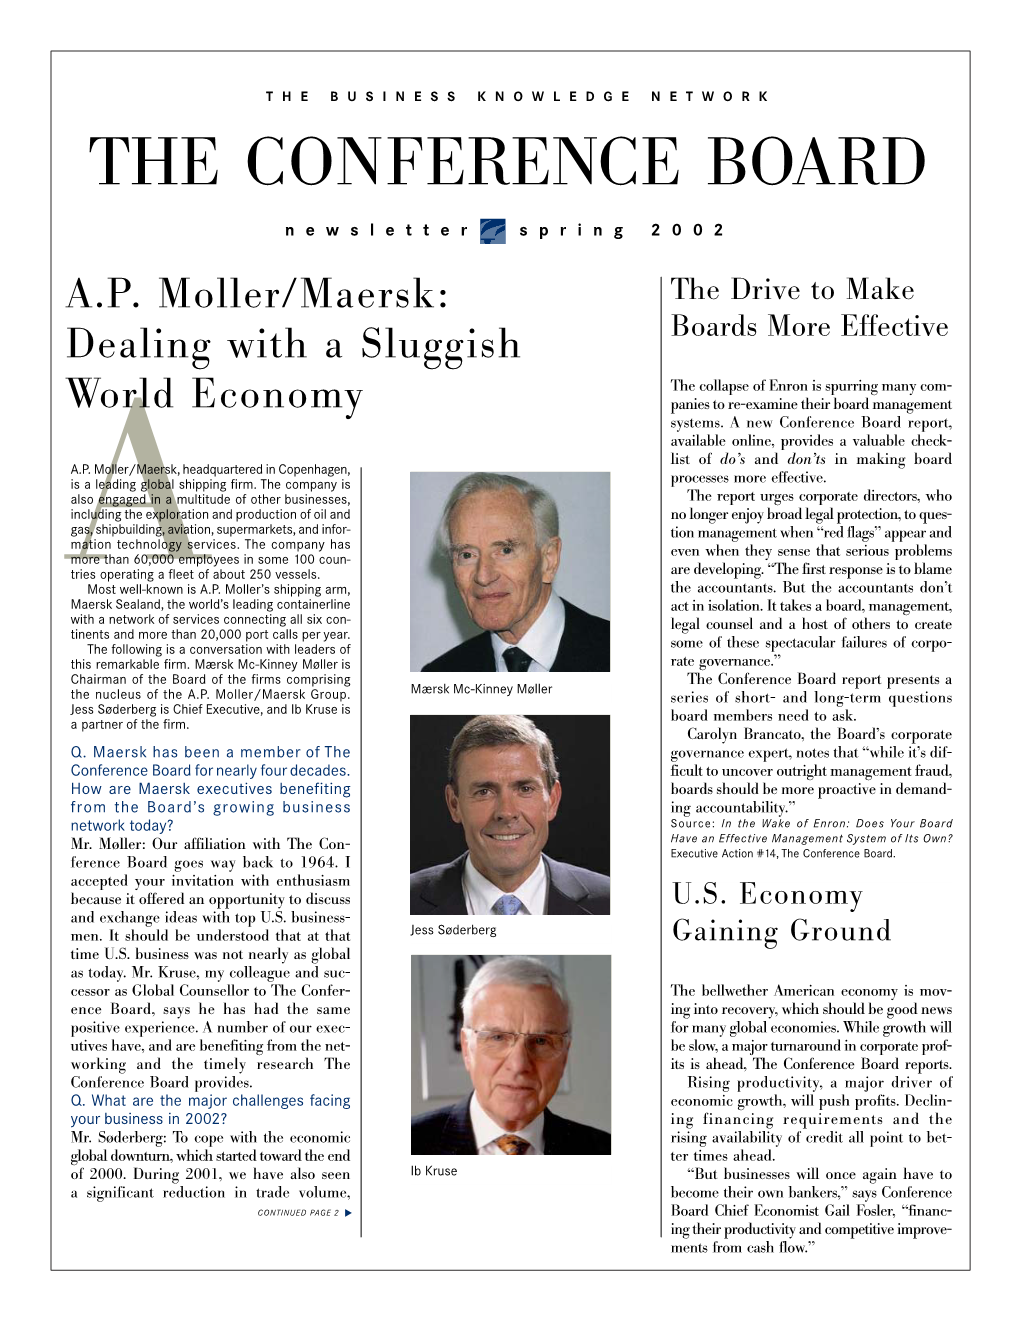 The Conference Board